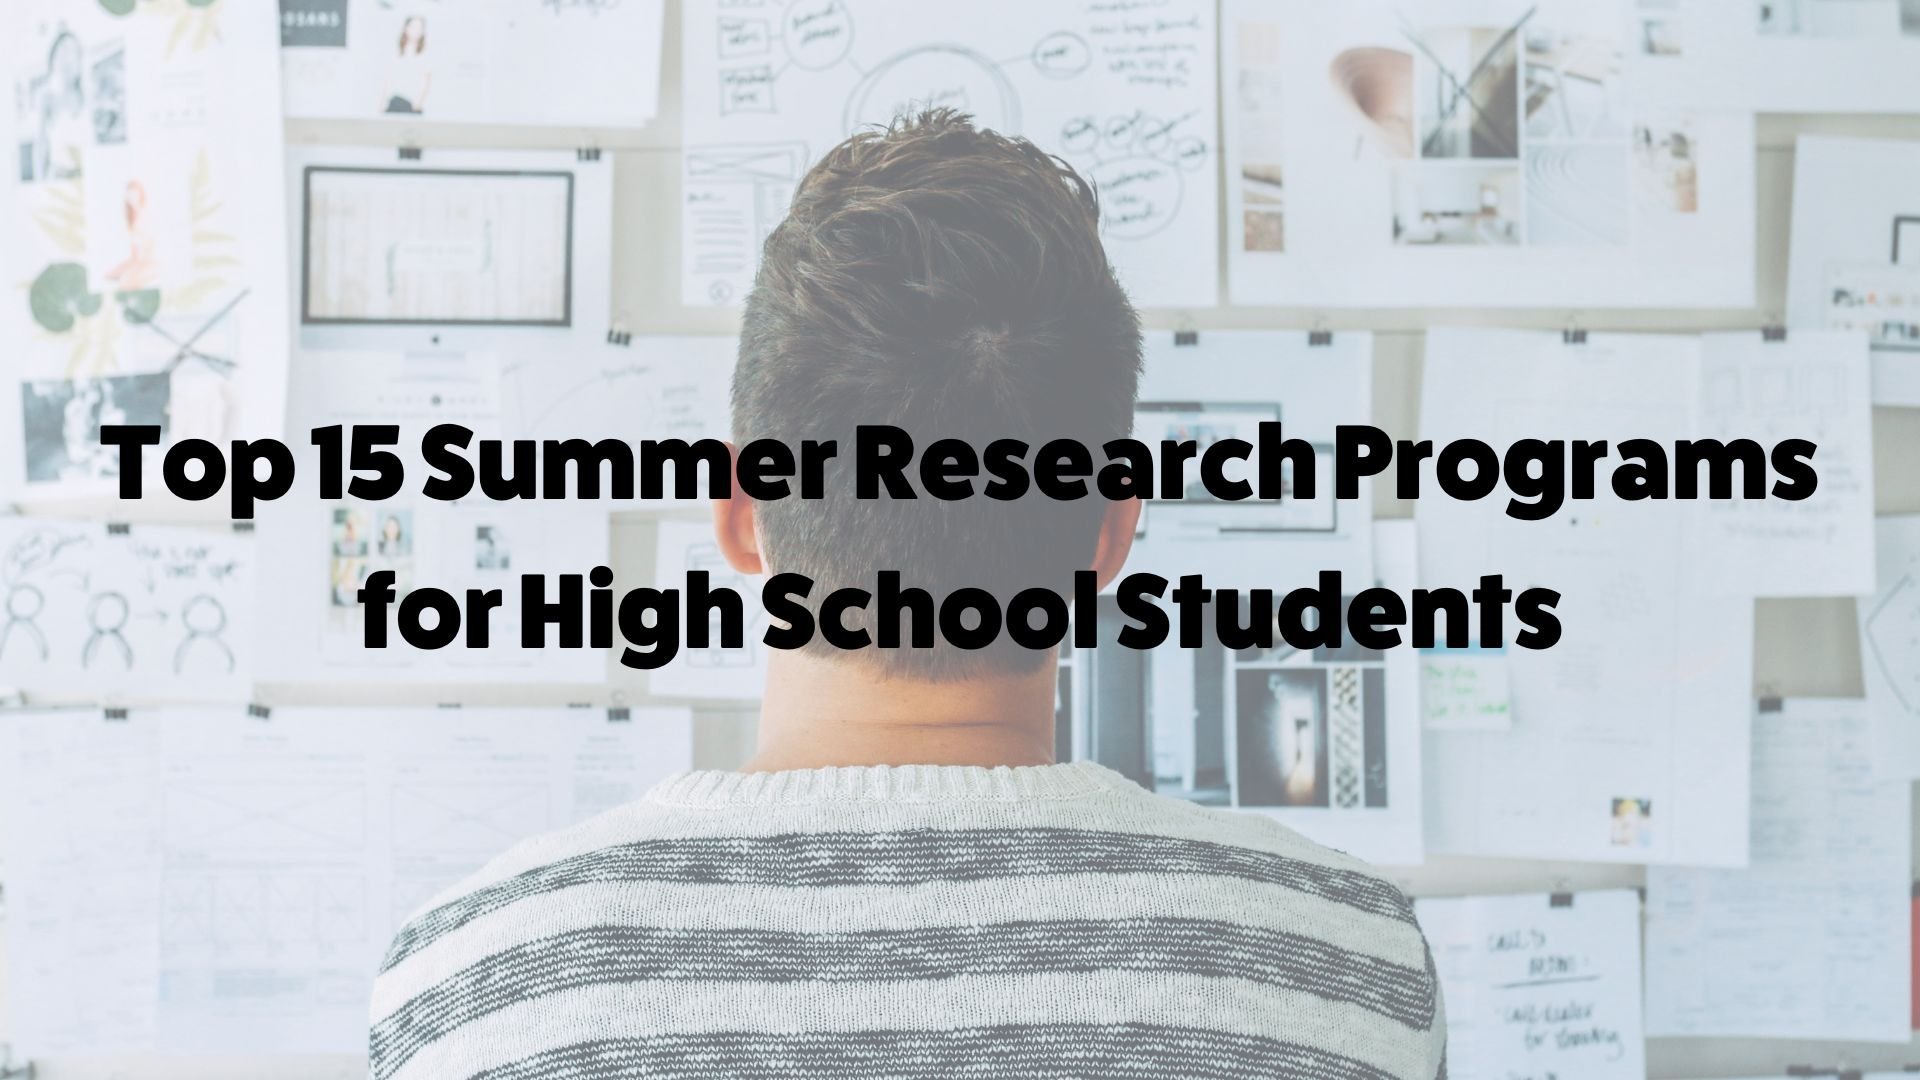 research programs for high school students toronto